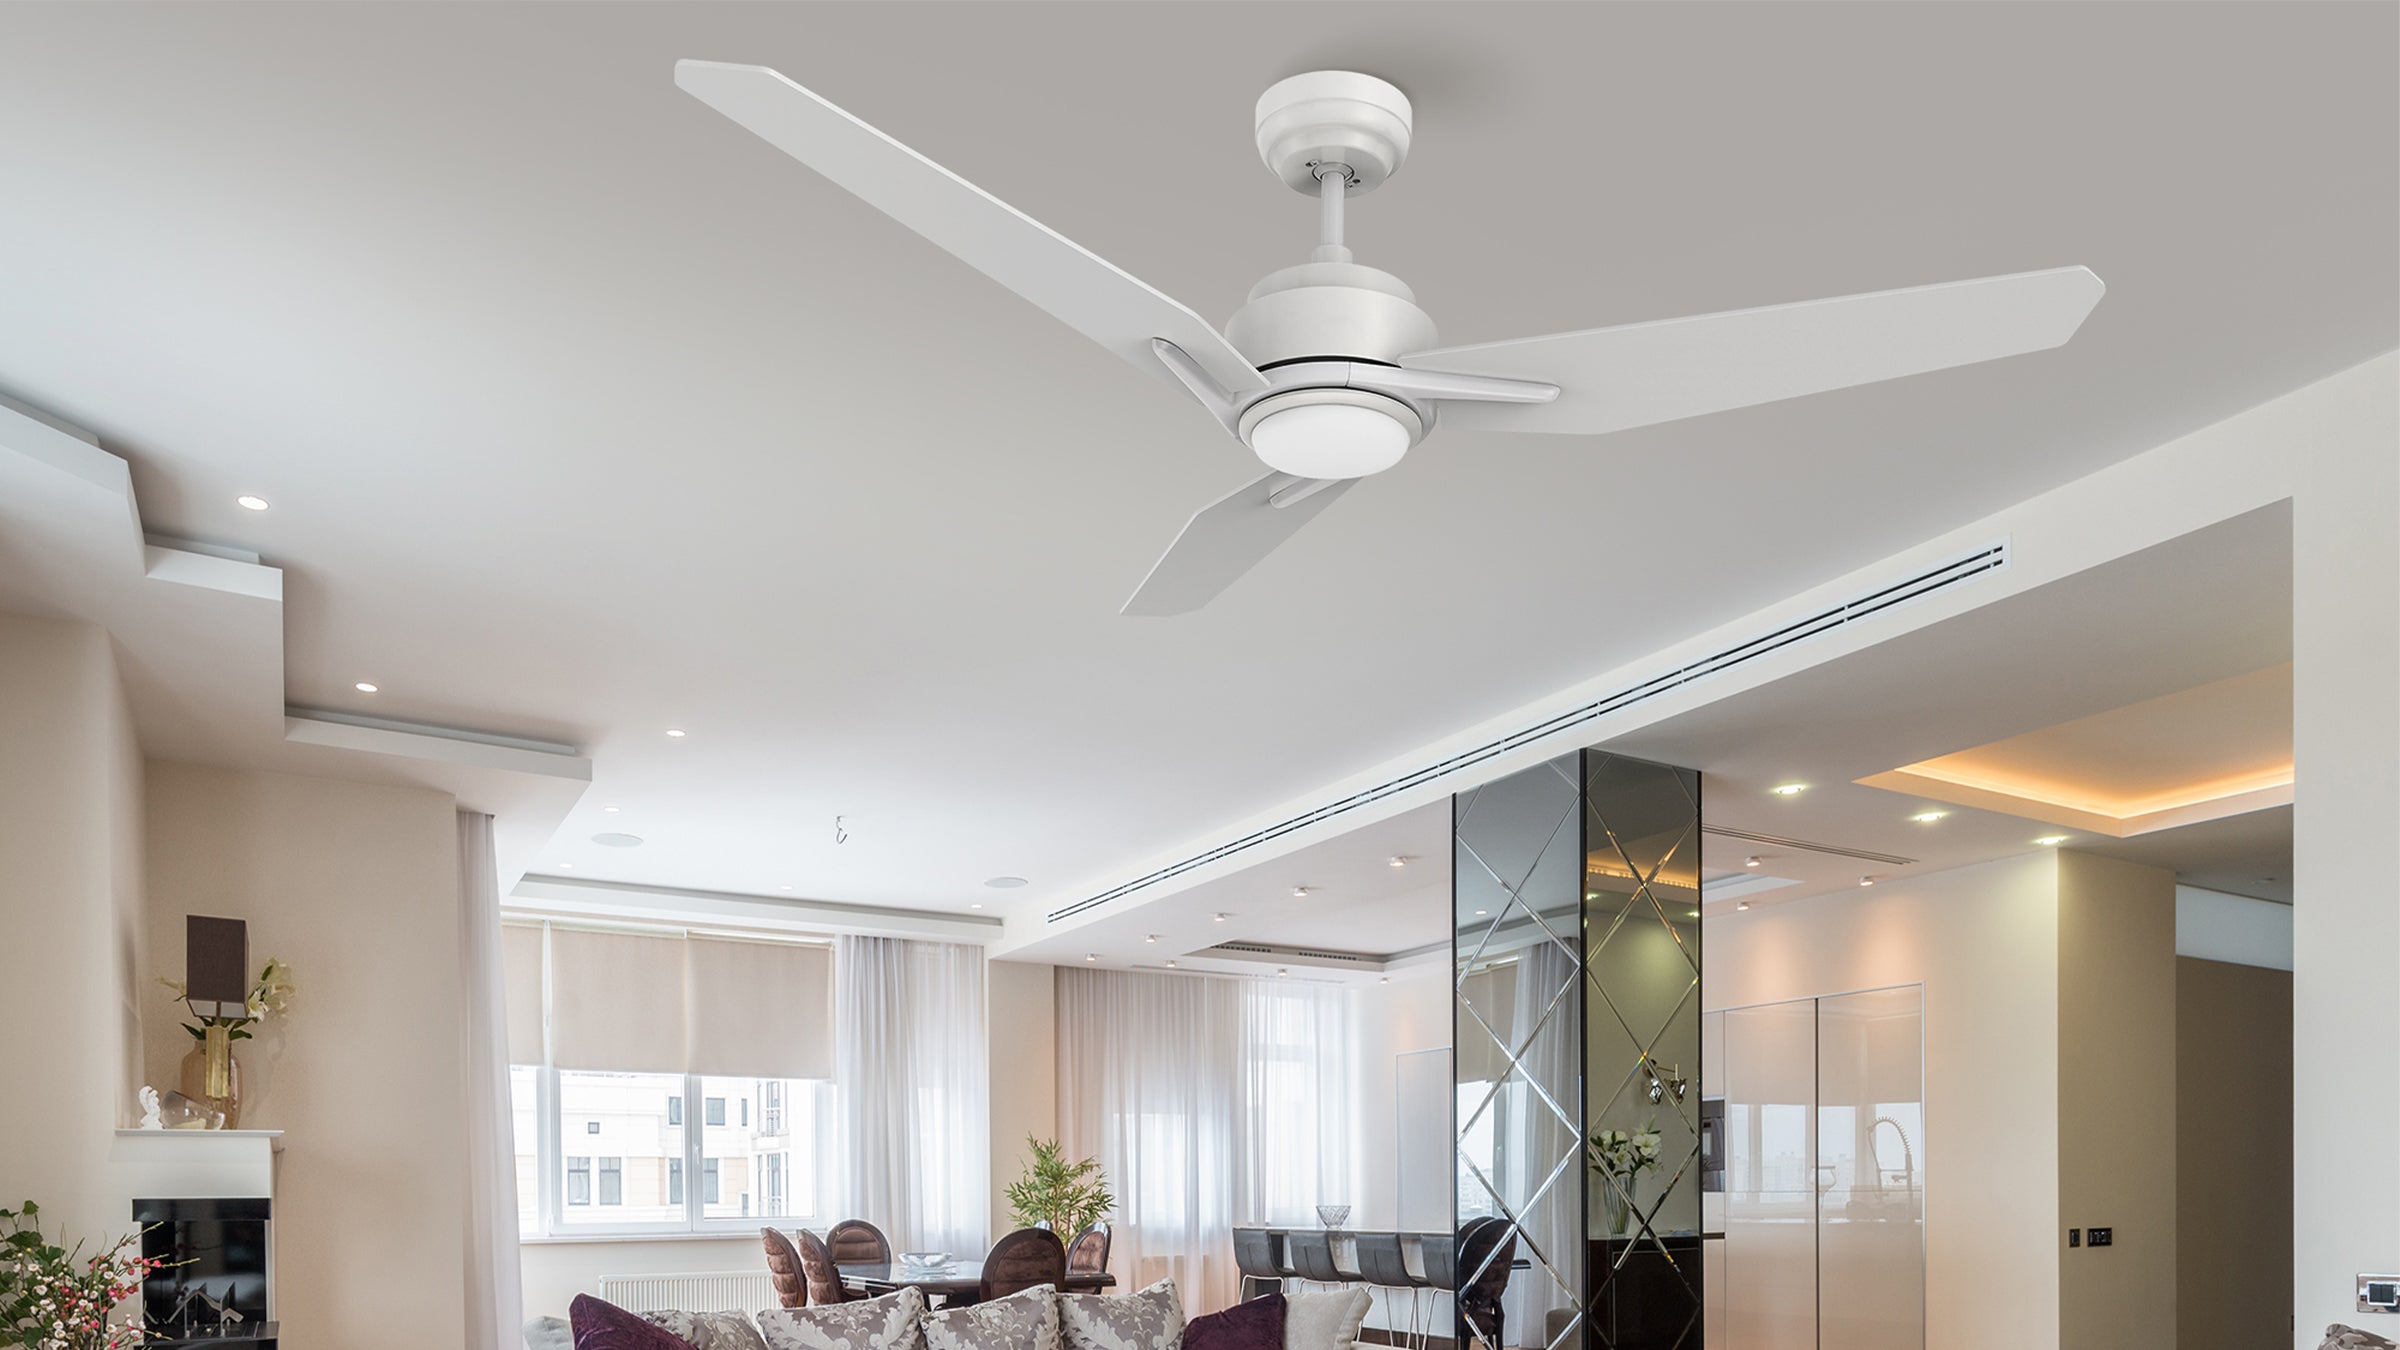 56 inch Ceiling Fans